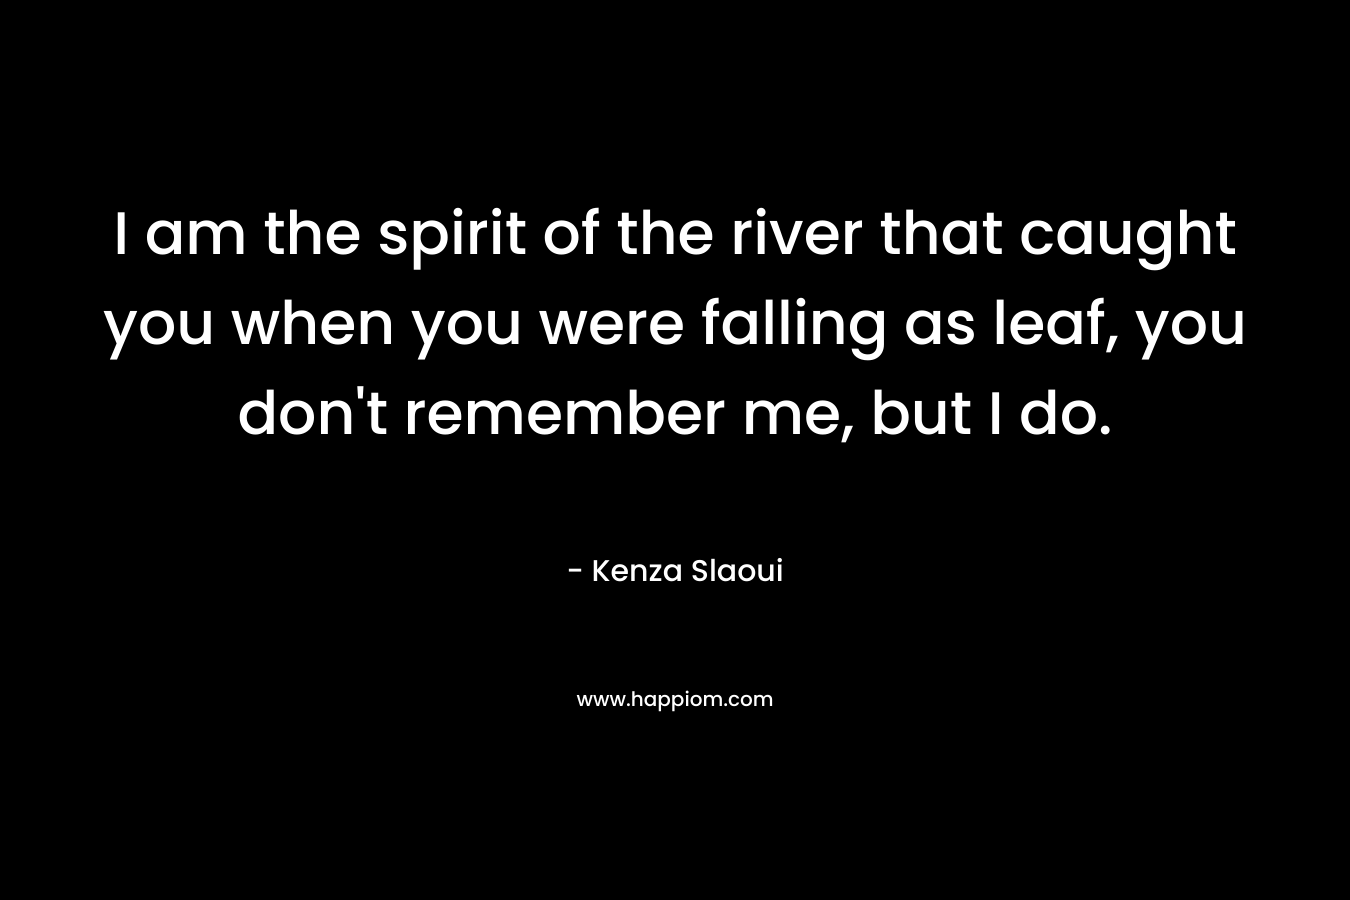 I am the spirit of the river that caught you when you were falling as leaf, you don’t remember me, but I do. – Kenza Slaoui